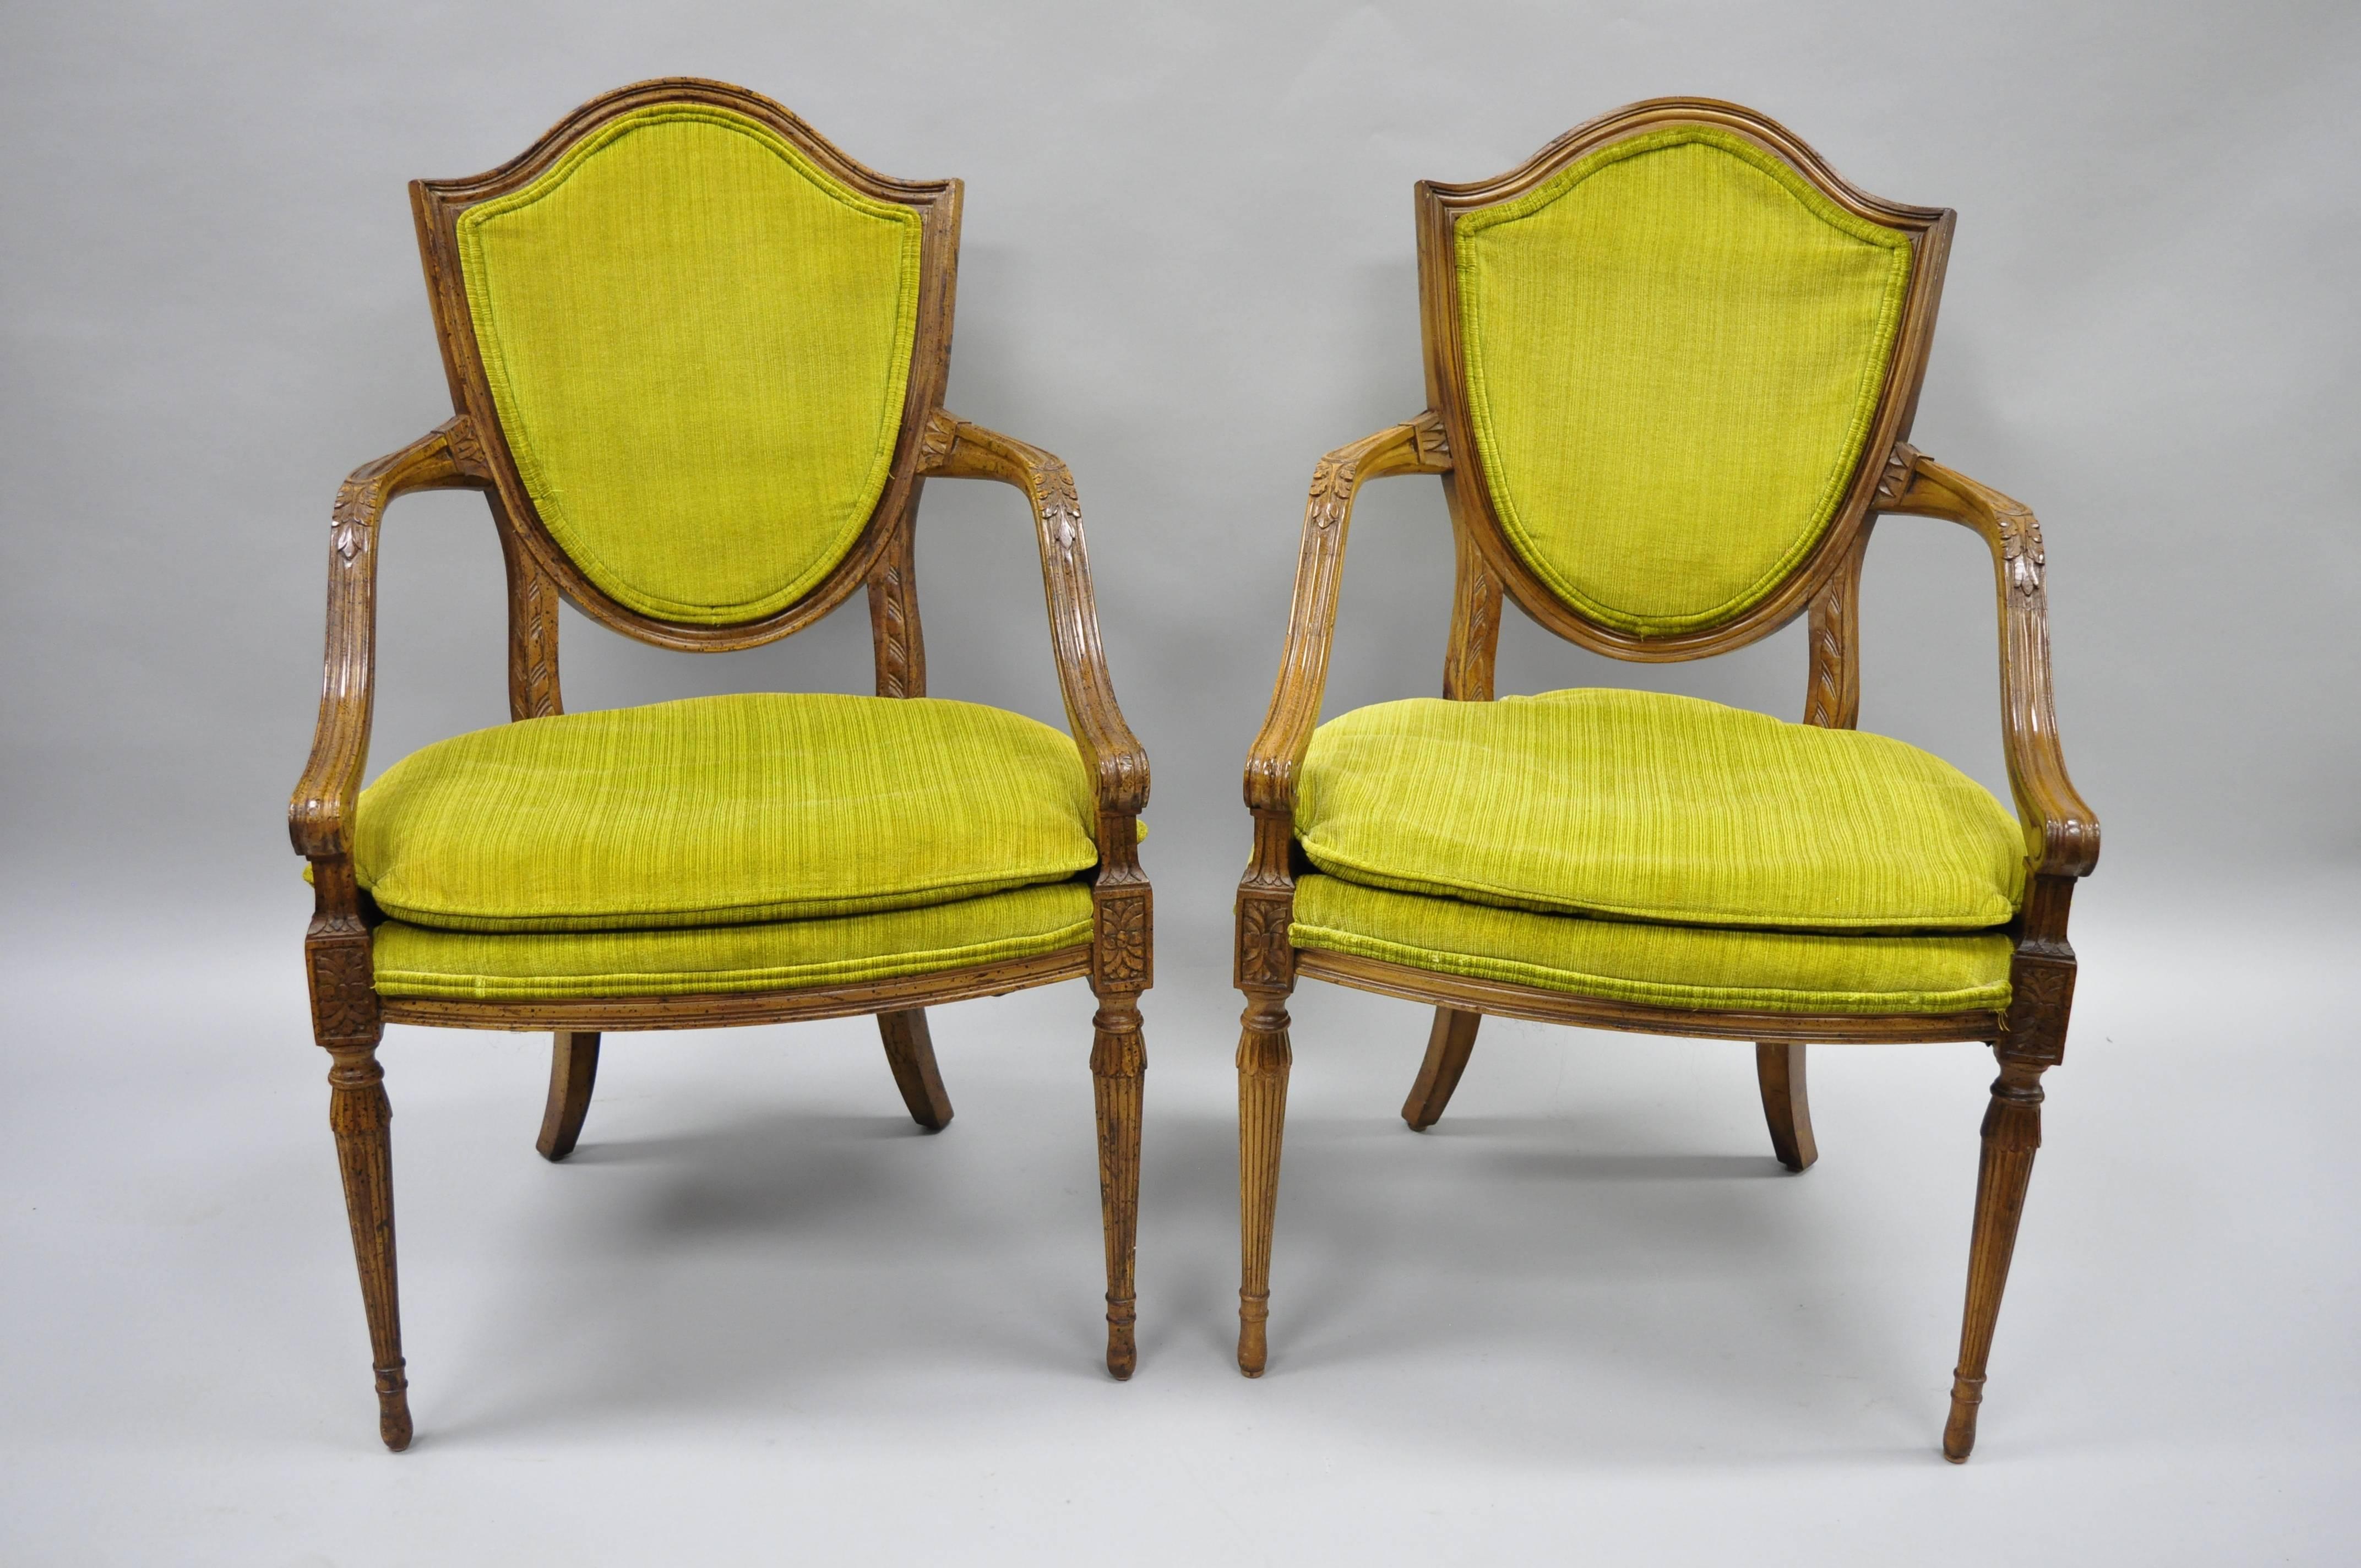 Pair of vintage French Louis XVI / Directoire style armchairs with shield back by American of Martinsville. Item features shapely arms with feather carvings, shield backs, solid wood frame, nicely carved details, tapered legs, quality American